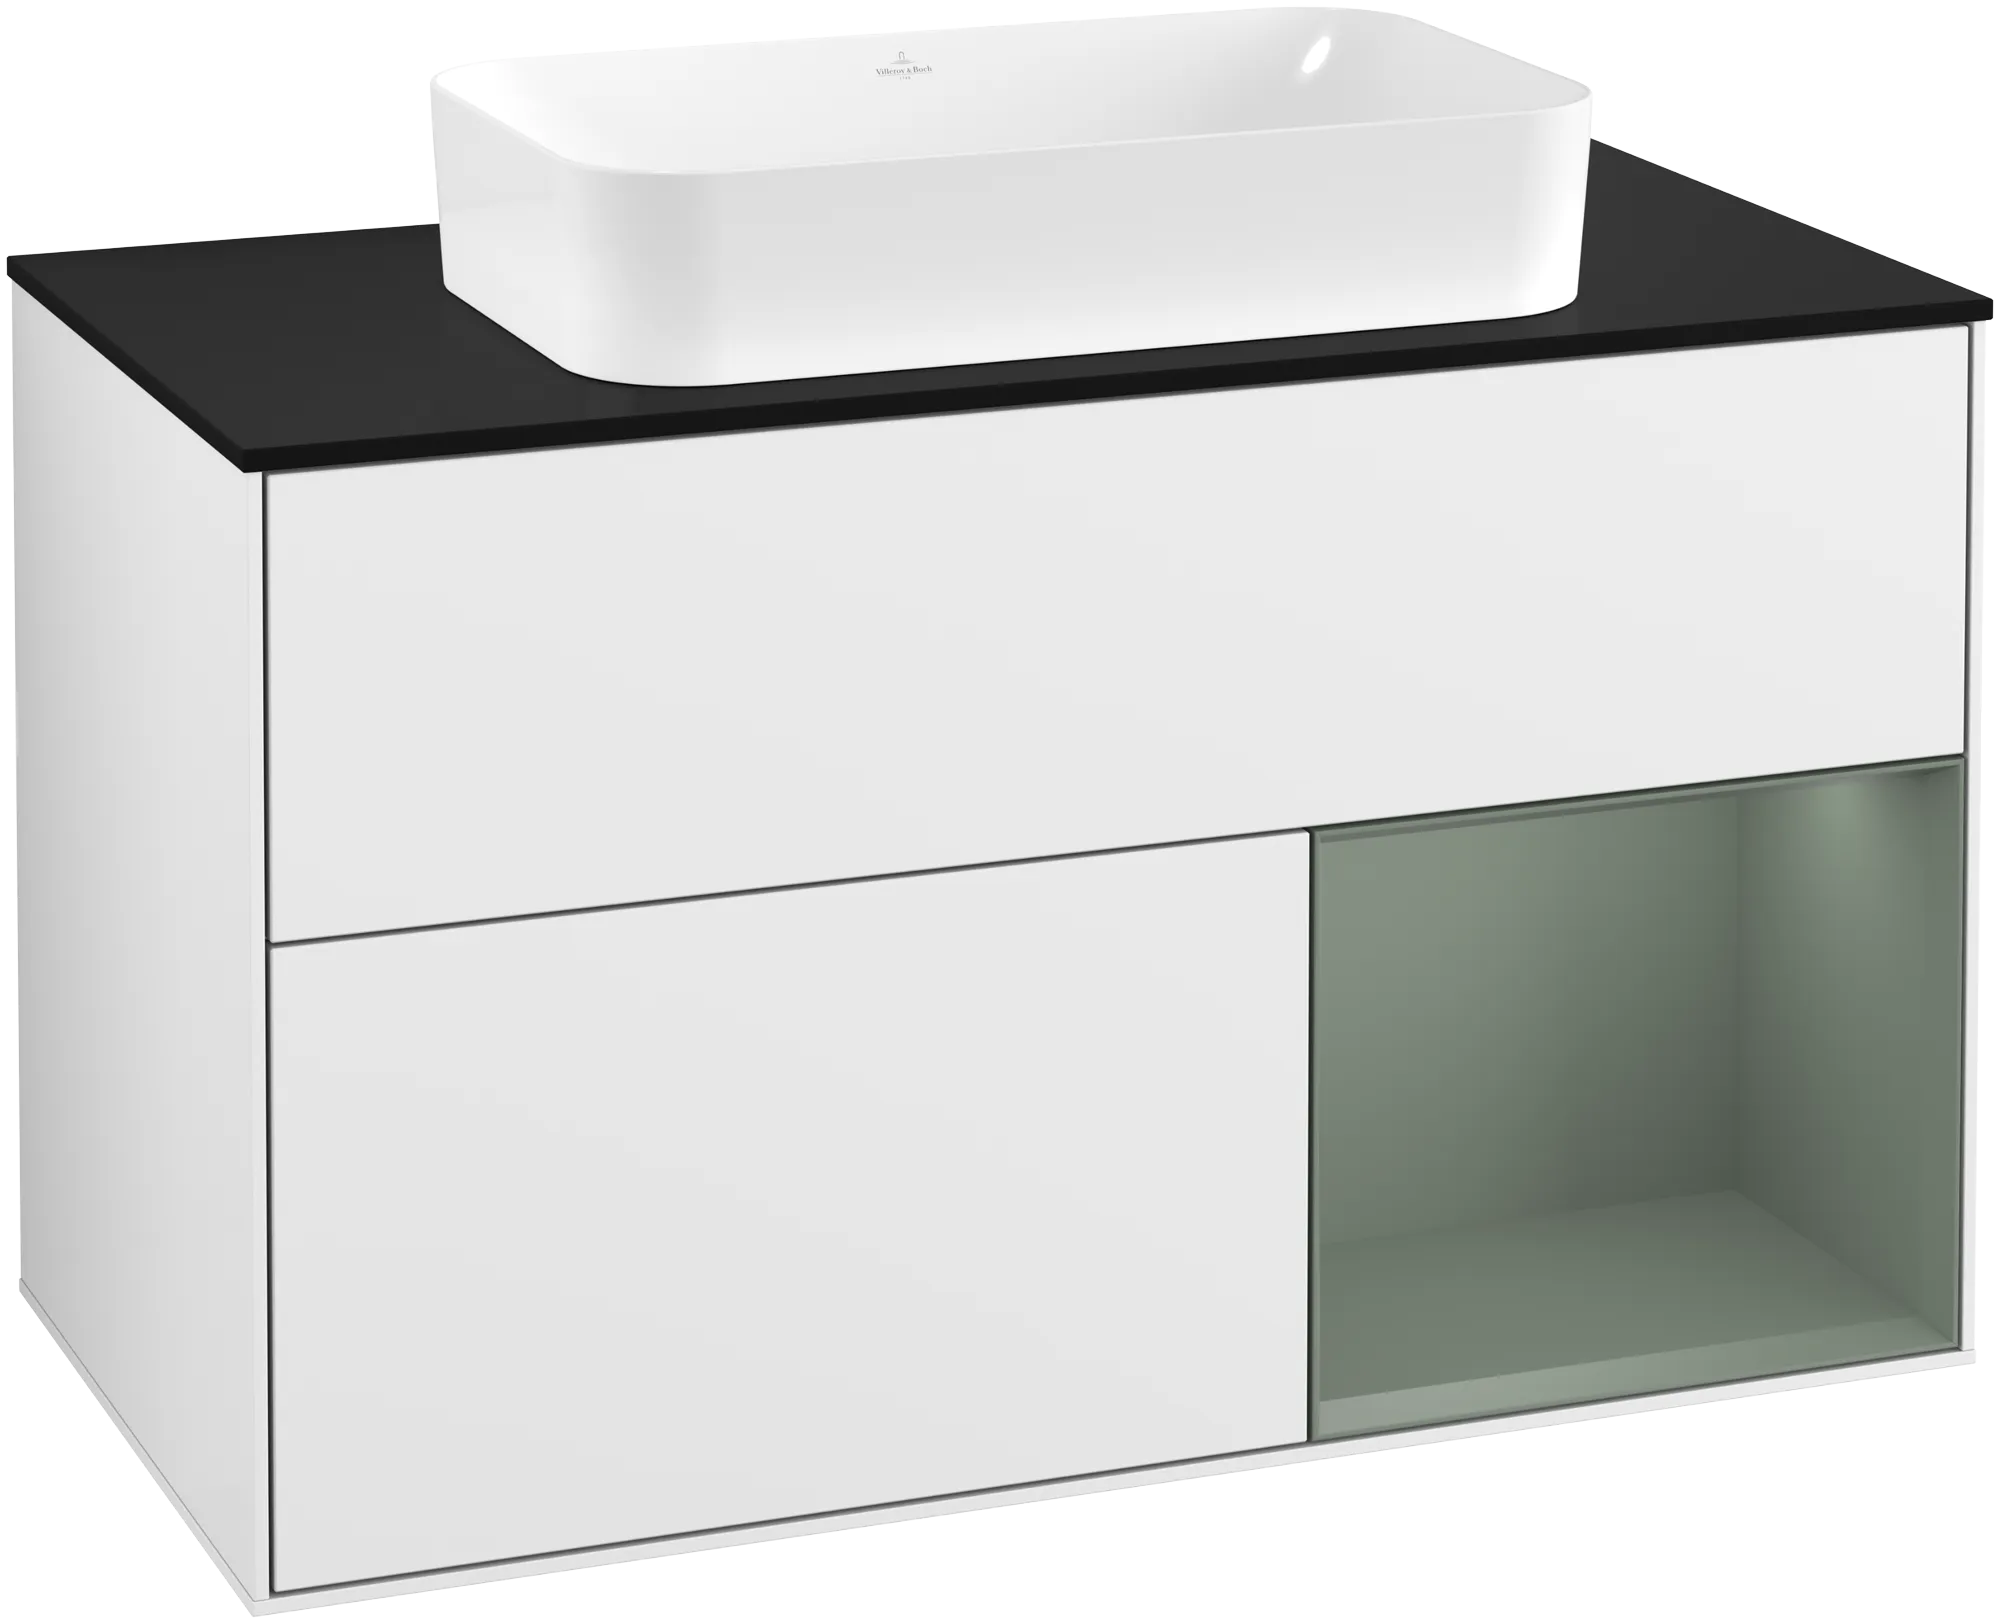 Picture of VILLEROY BOCH Finion Vanity unit, with lighting, 2 pull-out compartments, 1000 x 603 x 501 mm, Glossy White Lacquer / Olive Matt Lacquer / Glass Black Matt #G252GMGF